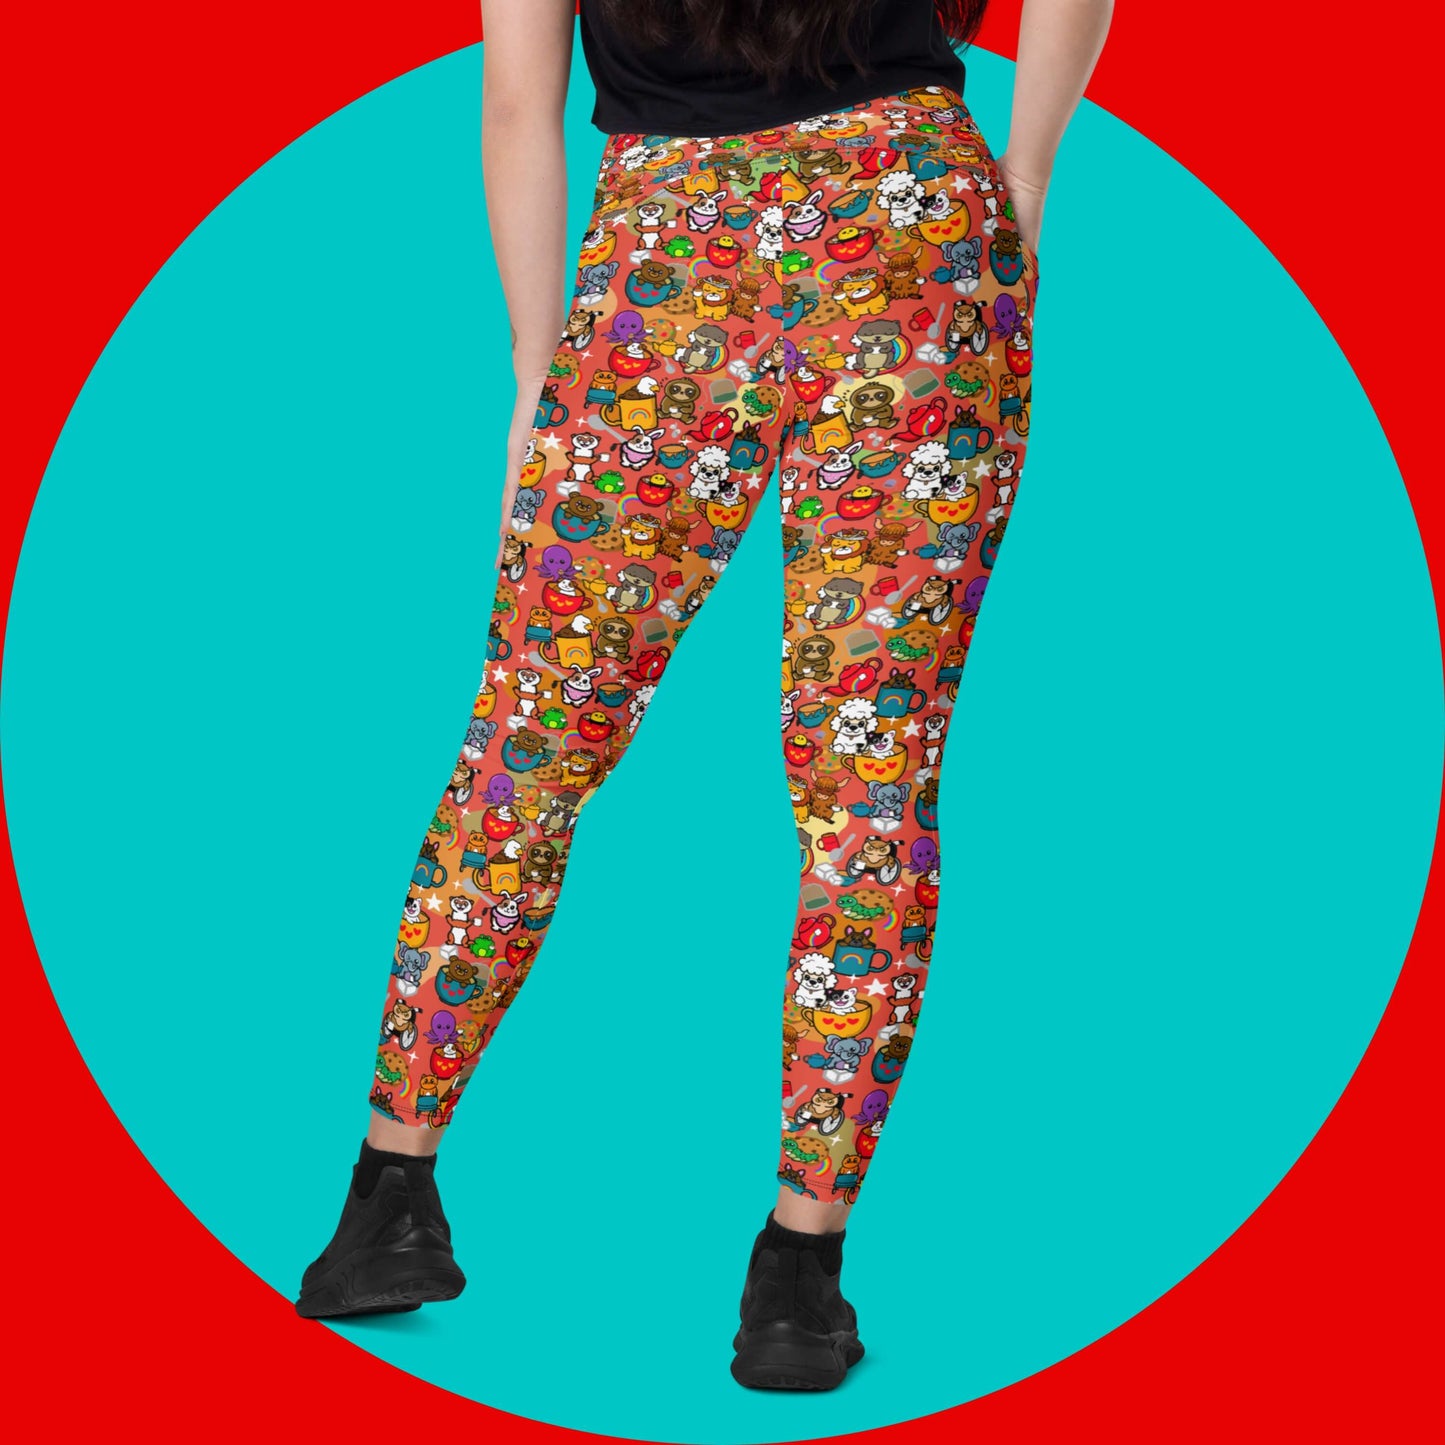 The Disabili Tea and Biscuits - Disability Leggings with pockets being modelled by a femme person wearing a black tee and black trainers on a red and blue background. The leggings feature various disabled and chronically ill animal characters drinking tea, sitting in tea mugs and holding up mugs. There is also various cookie biscuits, tea bags, sugar cubes, teapots, rainbows, sparkles and tea spills all underneath. The leggings are a punny gift raising awareness for disabilities.